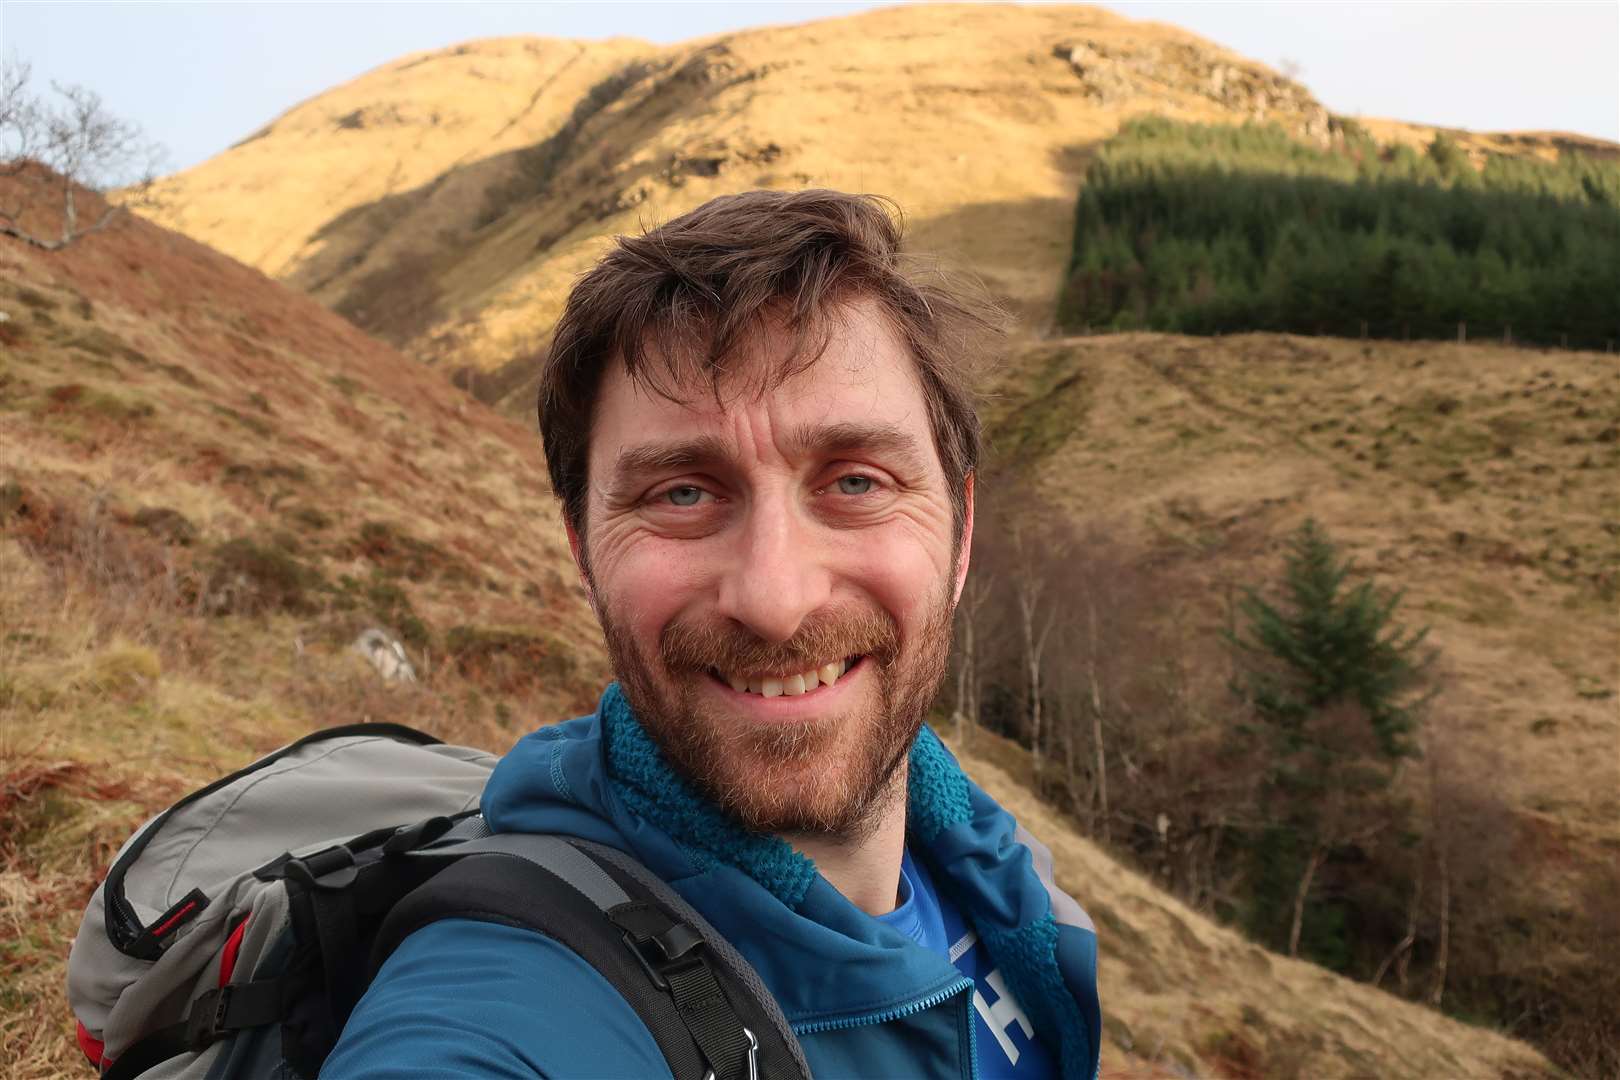 John Davidson has been writing an Active Outdoors column for the Inverness Courier and other Highland News and Media titles since 2008.